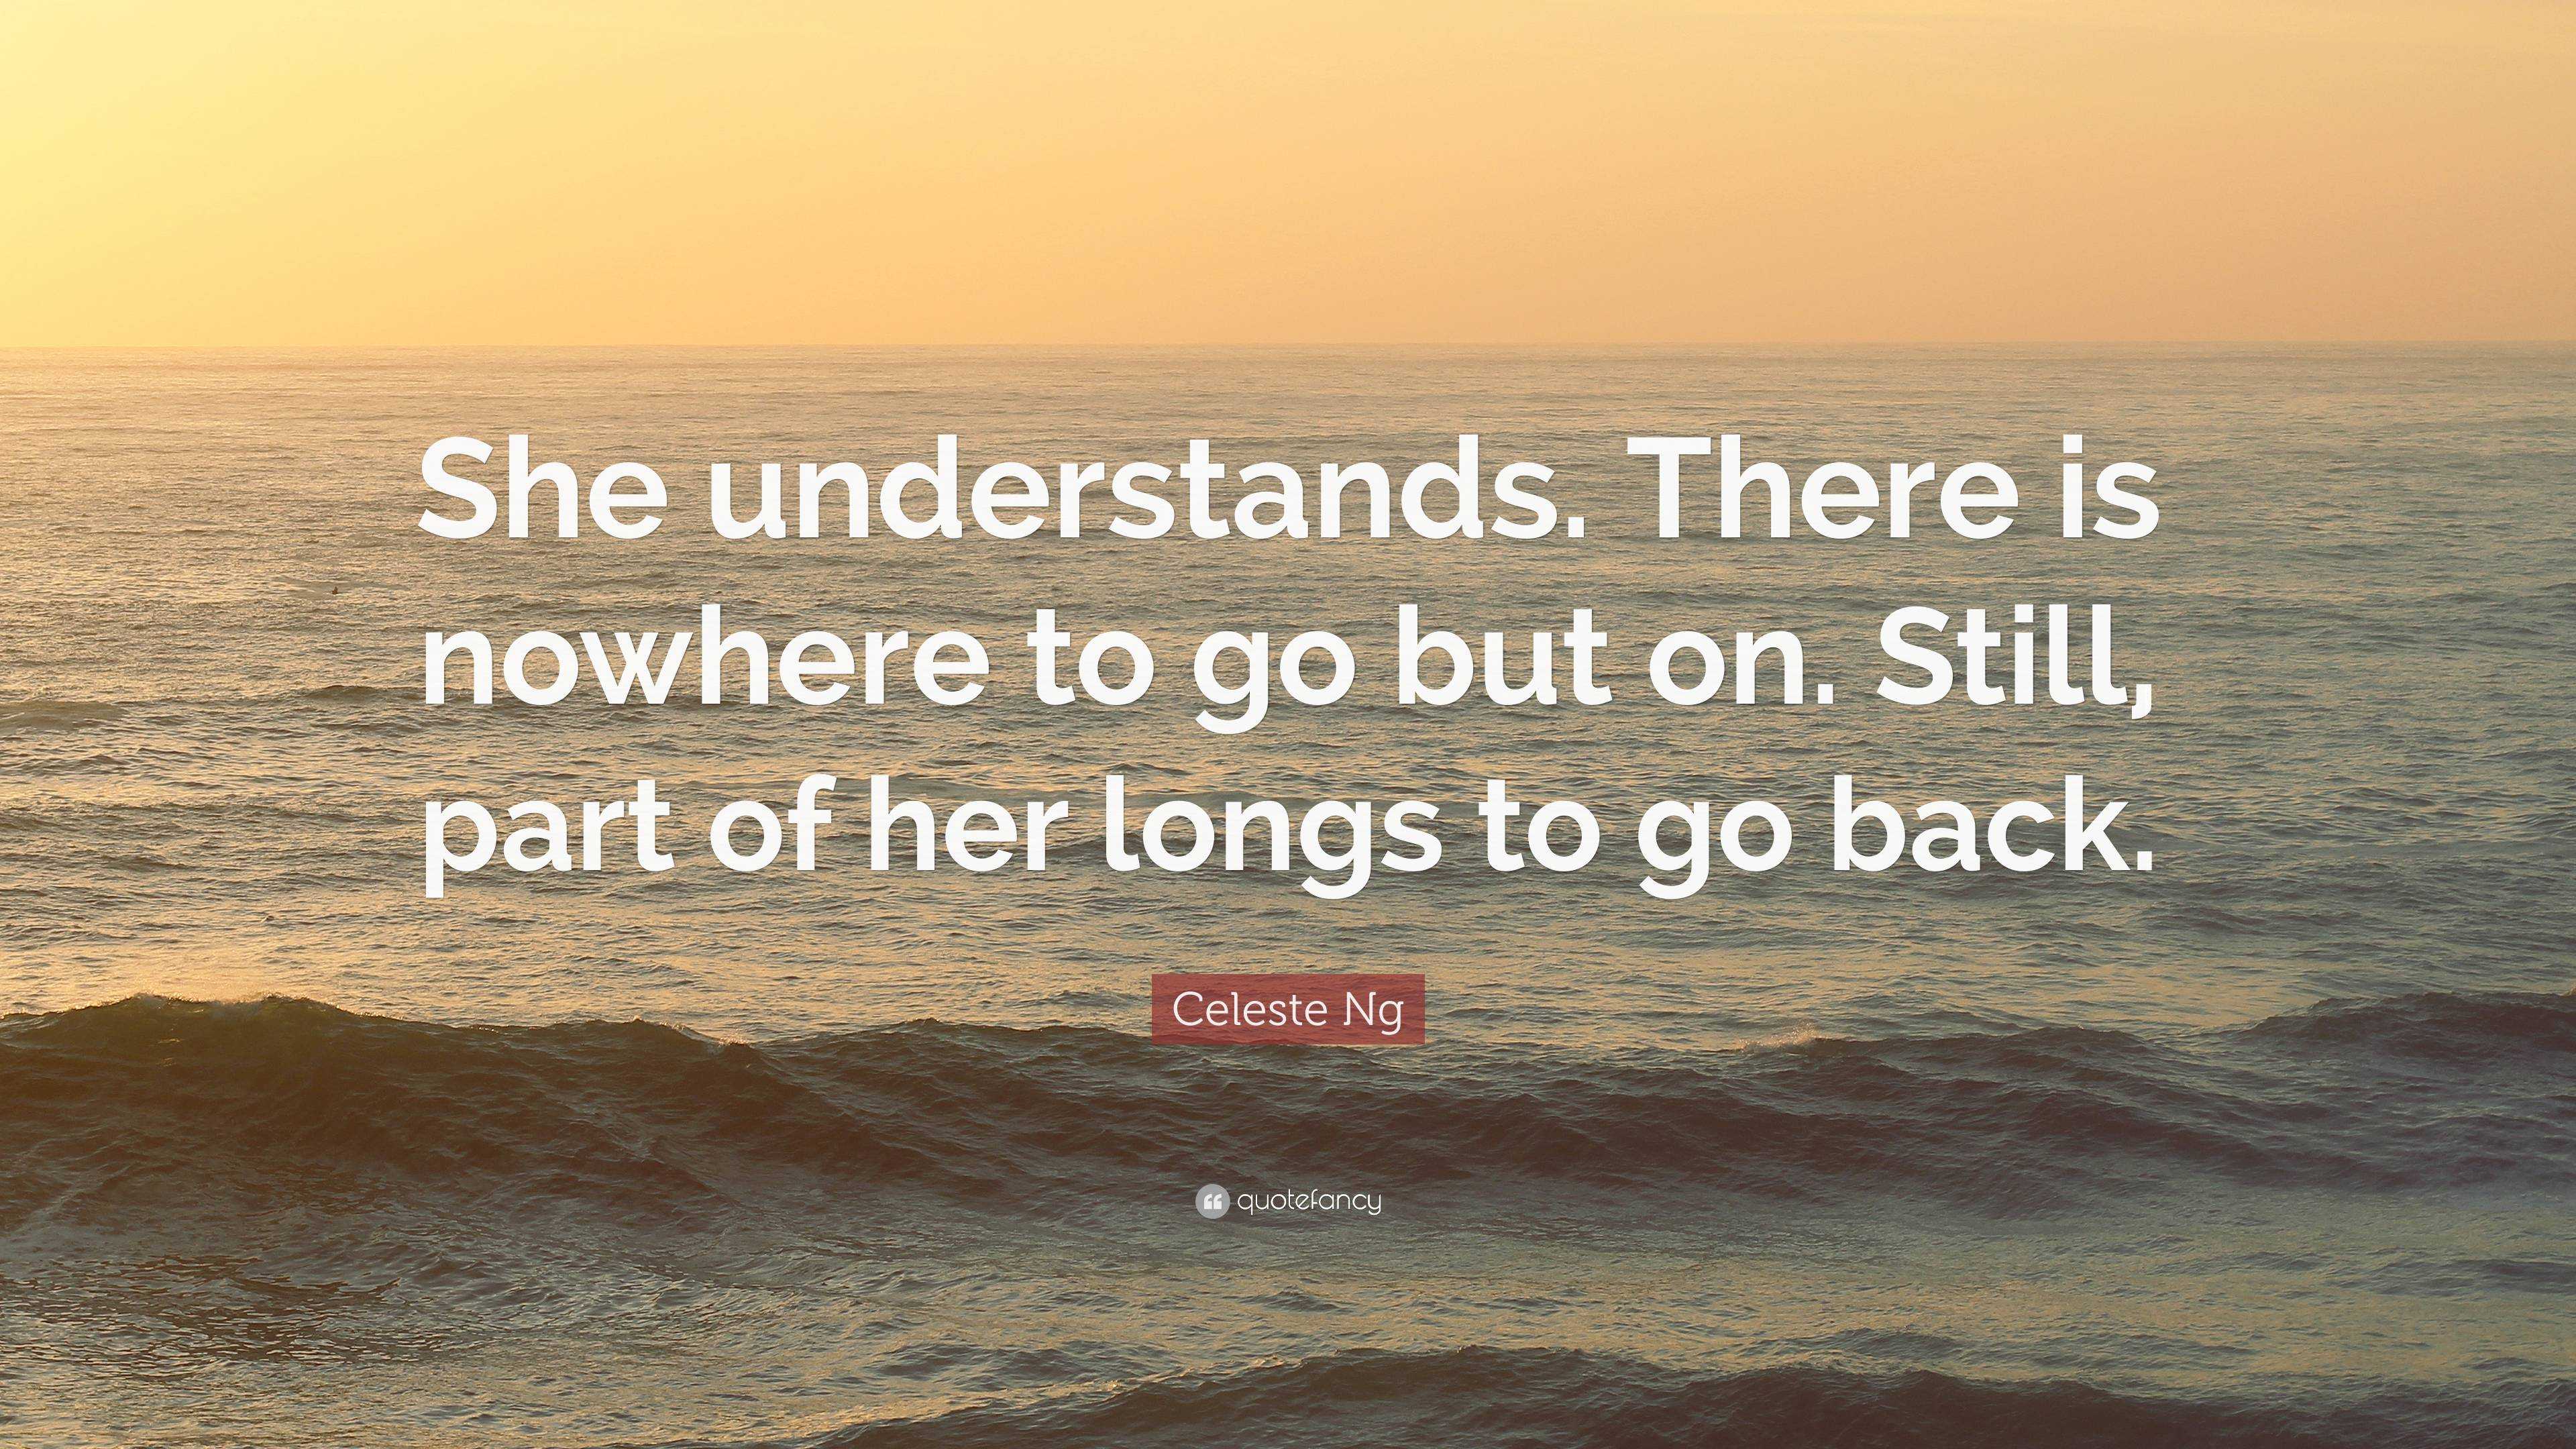 Celeste Ng Quote: “She understands. There is nowhere to go but on ...